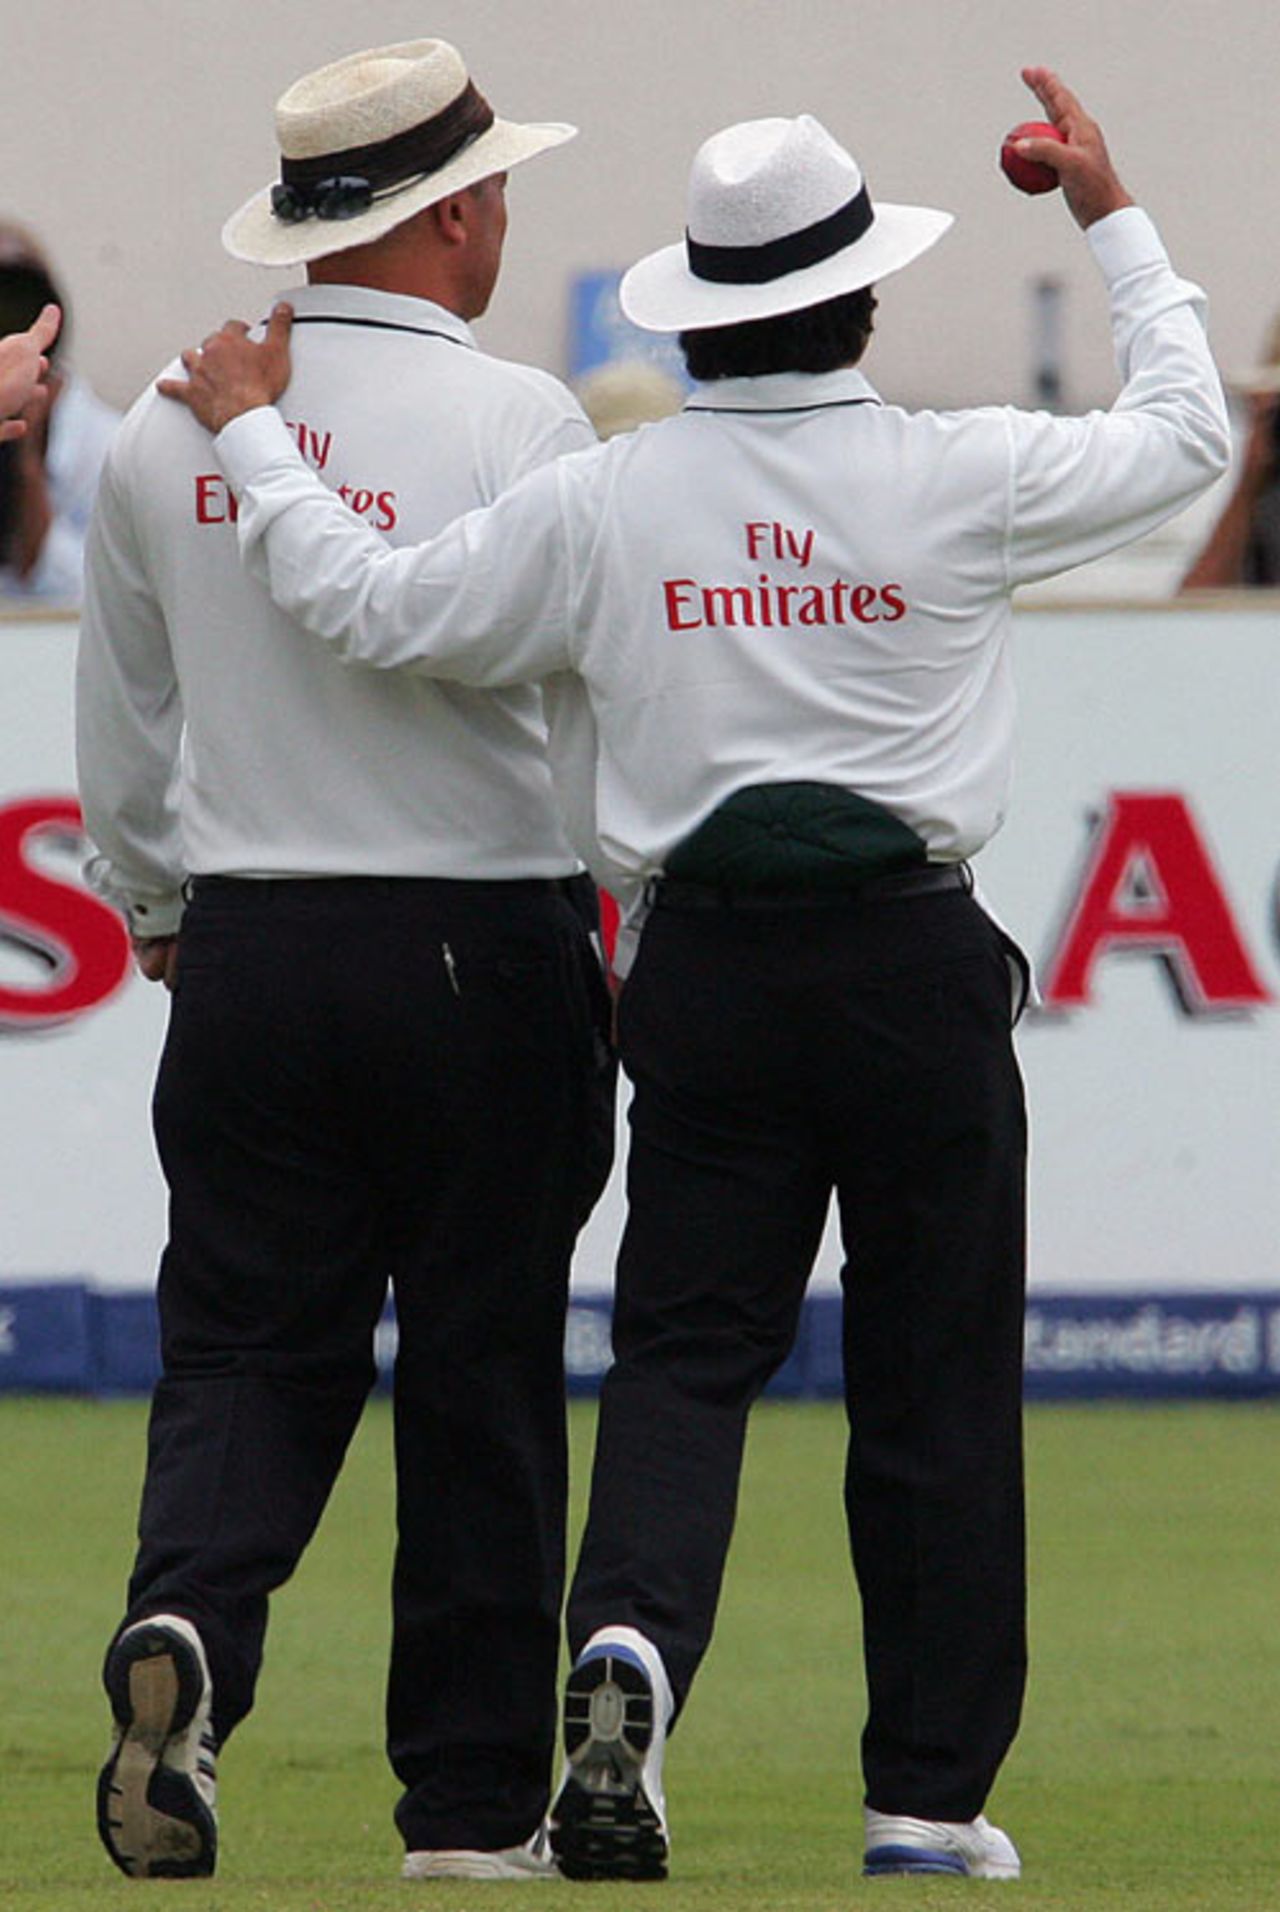 Asad Rauf helps Mark Benson off the field after he complained of heart palpitations, South Africa v India, 2nd Test, Durban, December 28, 2006 